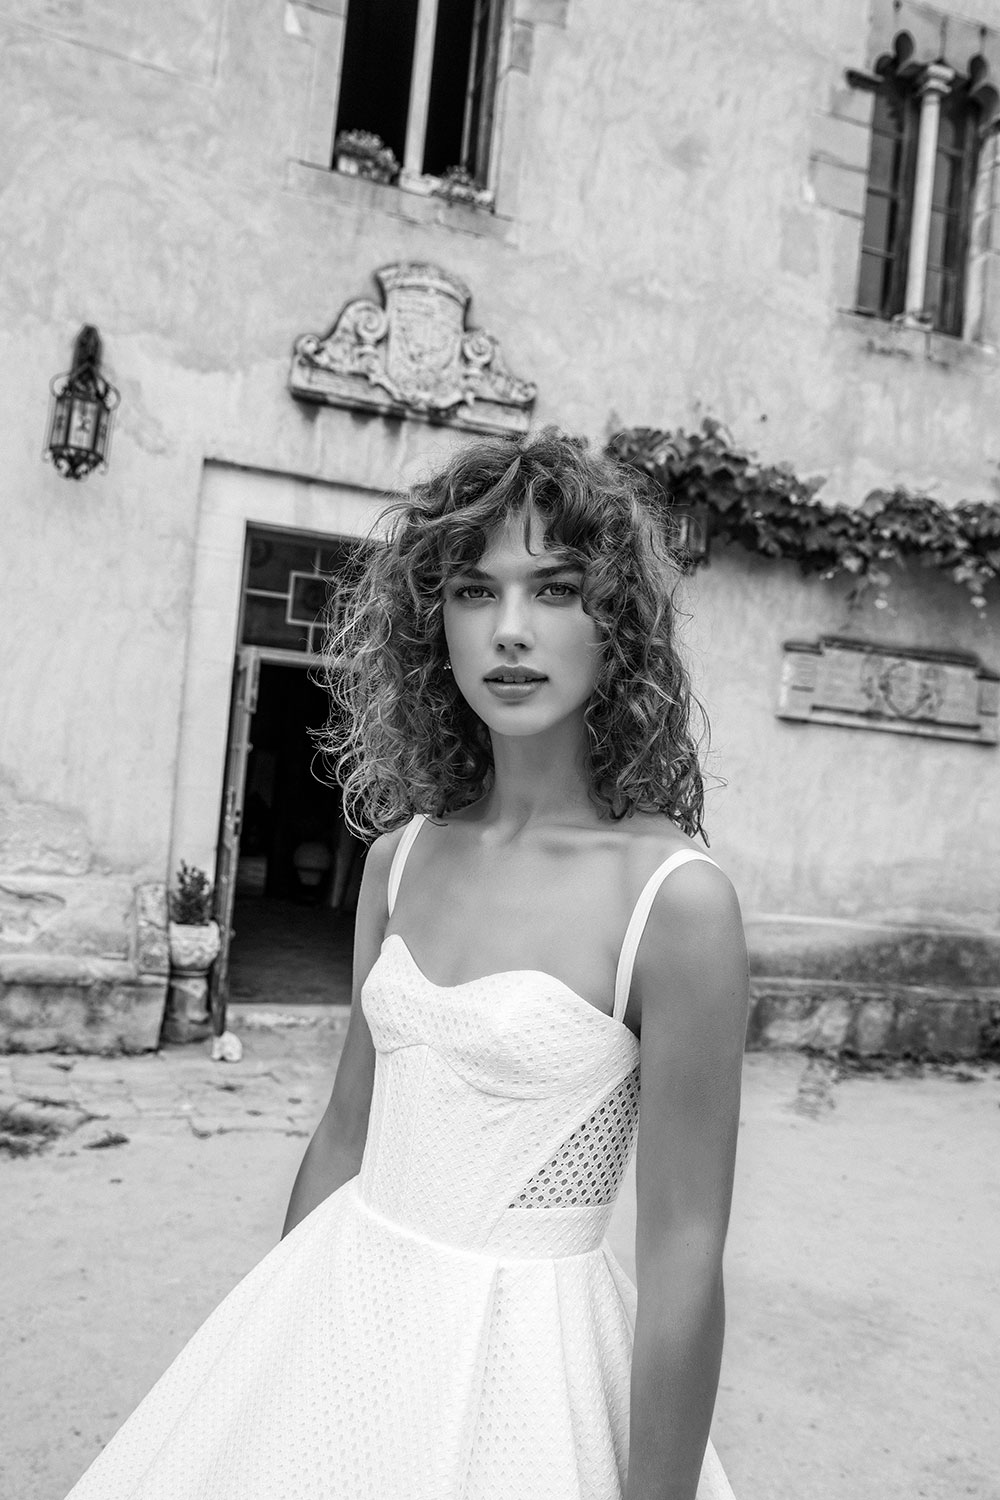 Introducing 'Metropolis' - the 2018 collection from Jesus Peiro - Miss ...